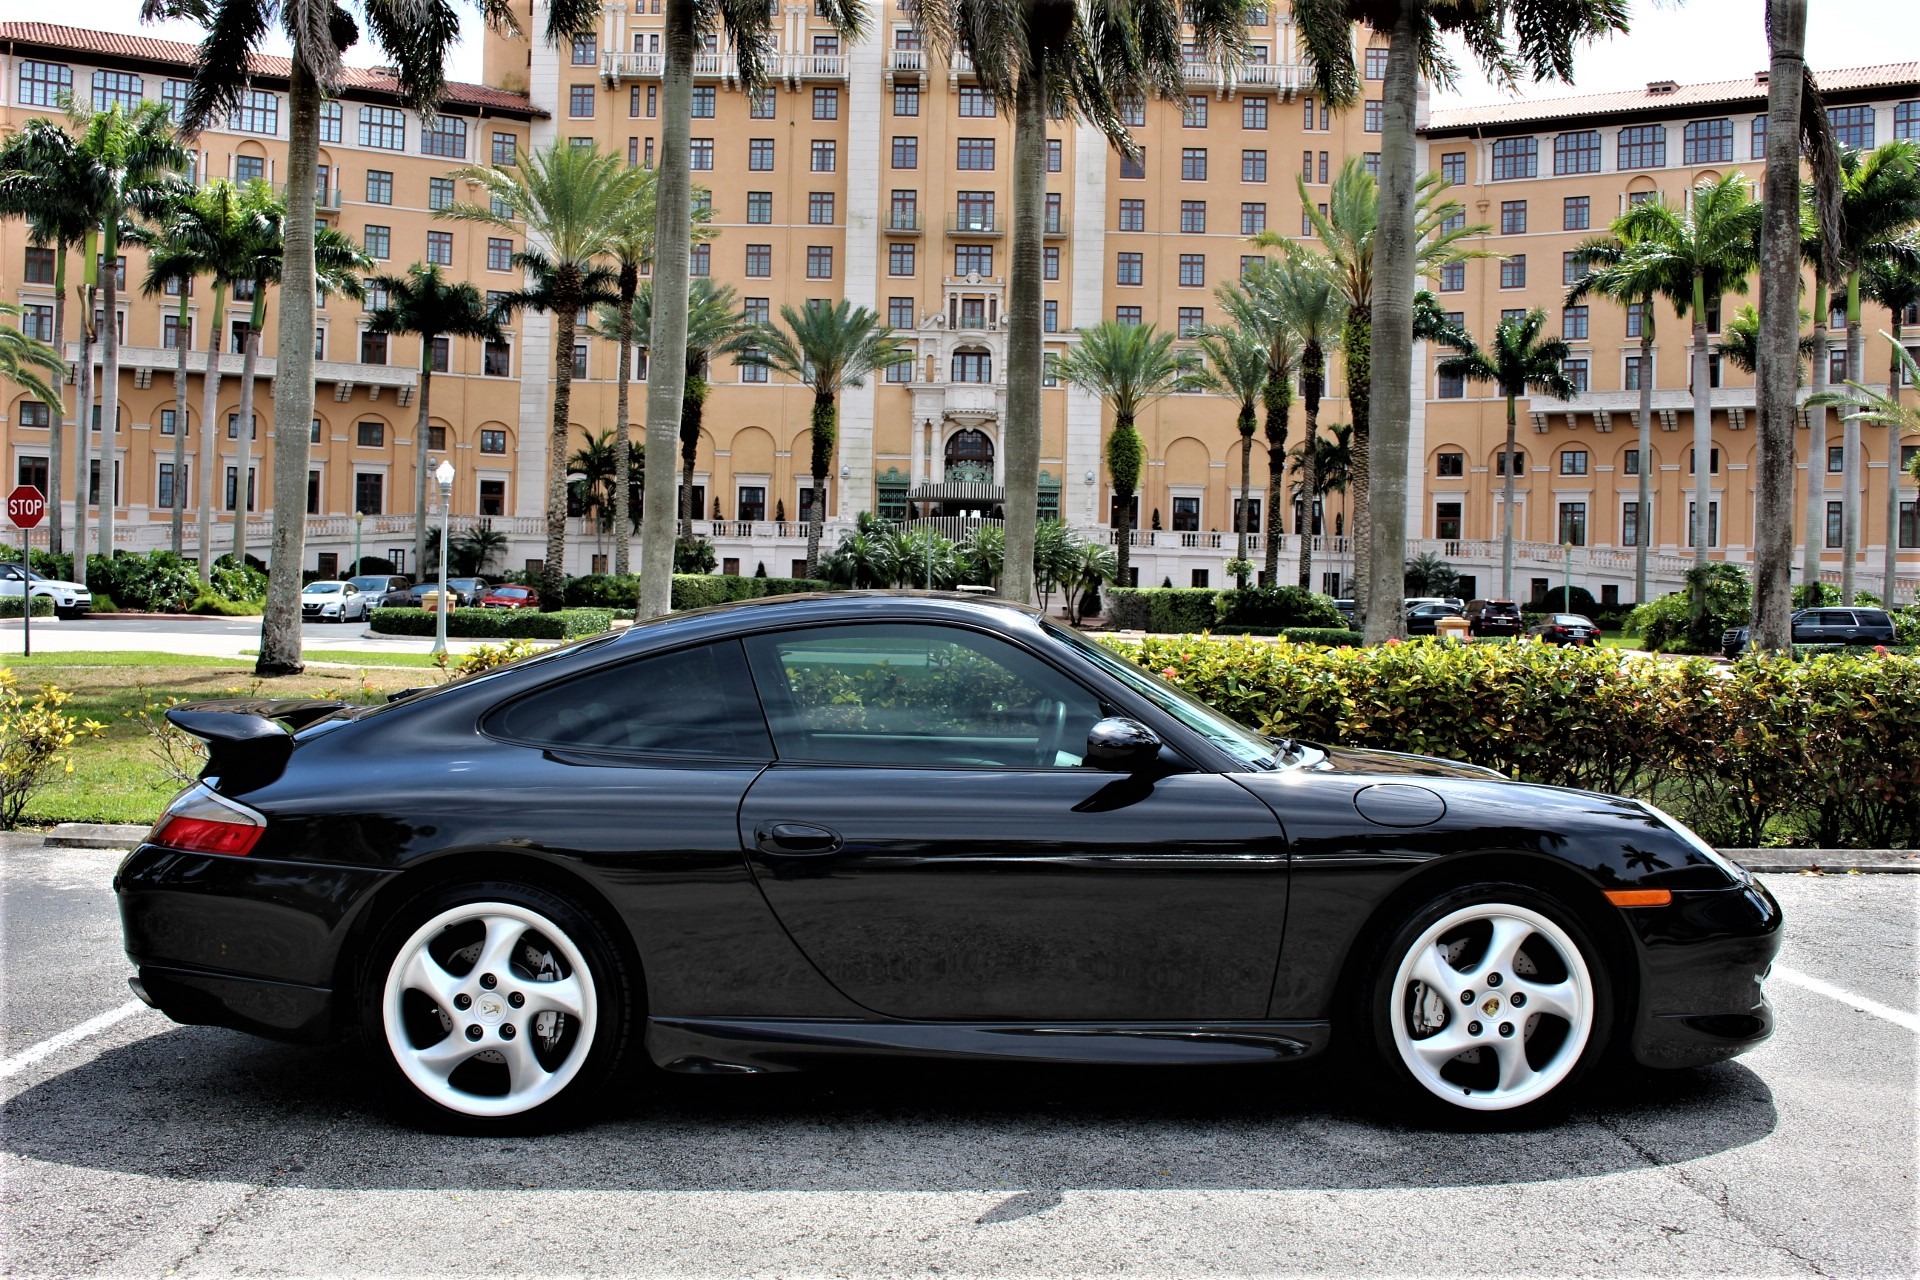 Used 2001 Porsche 911 Carrera 4 for sale Sold at The Gables Sports Cars in Miami FL 33146 1